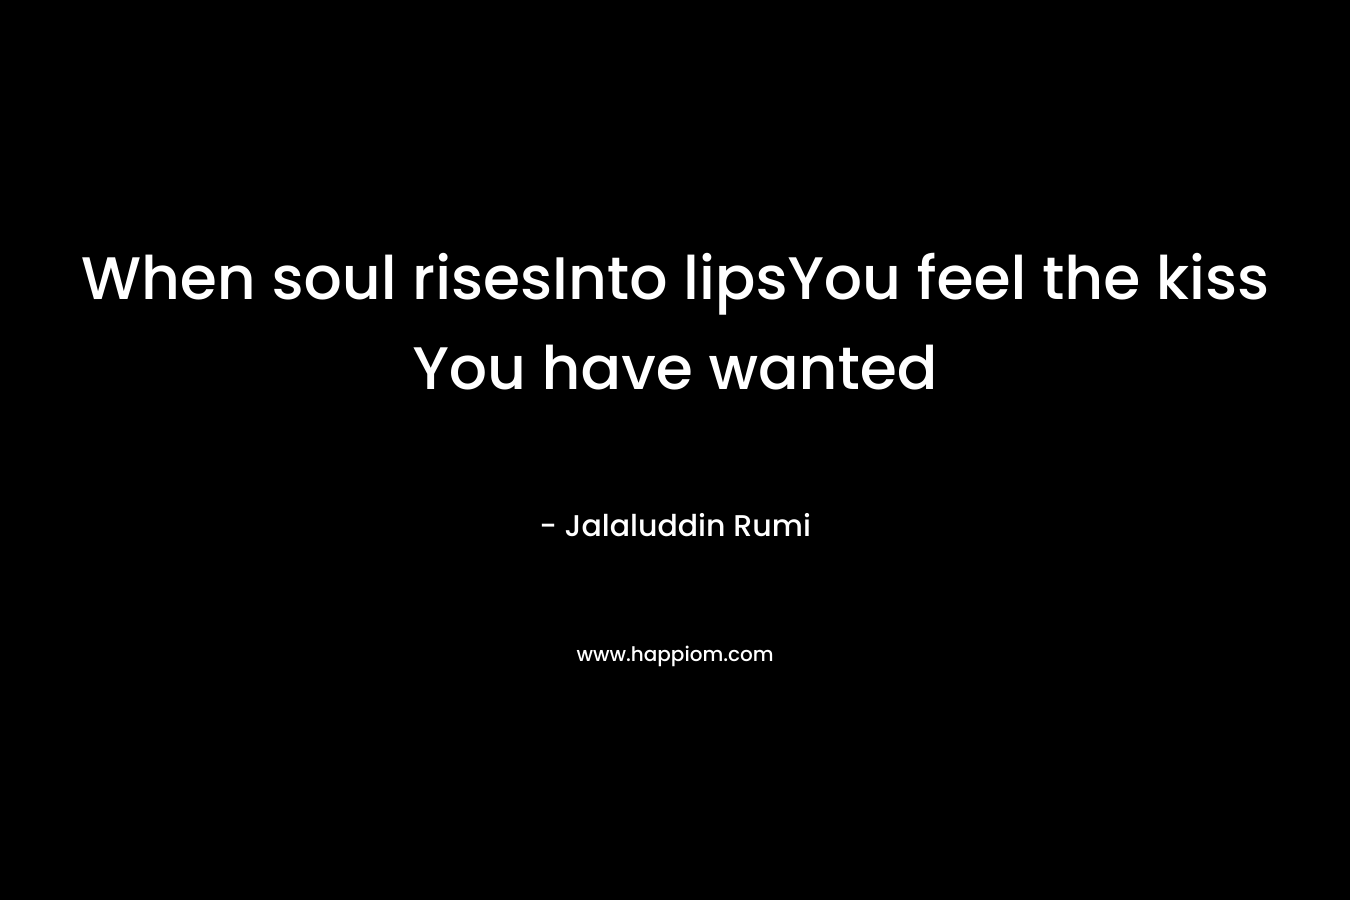 When soul risesInto lipsYou feel the kiss You have wanted